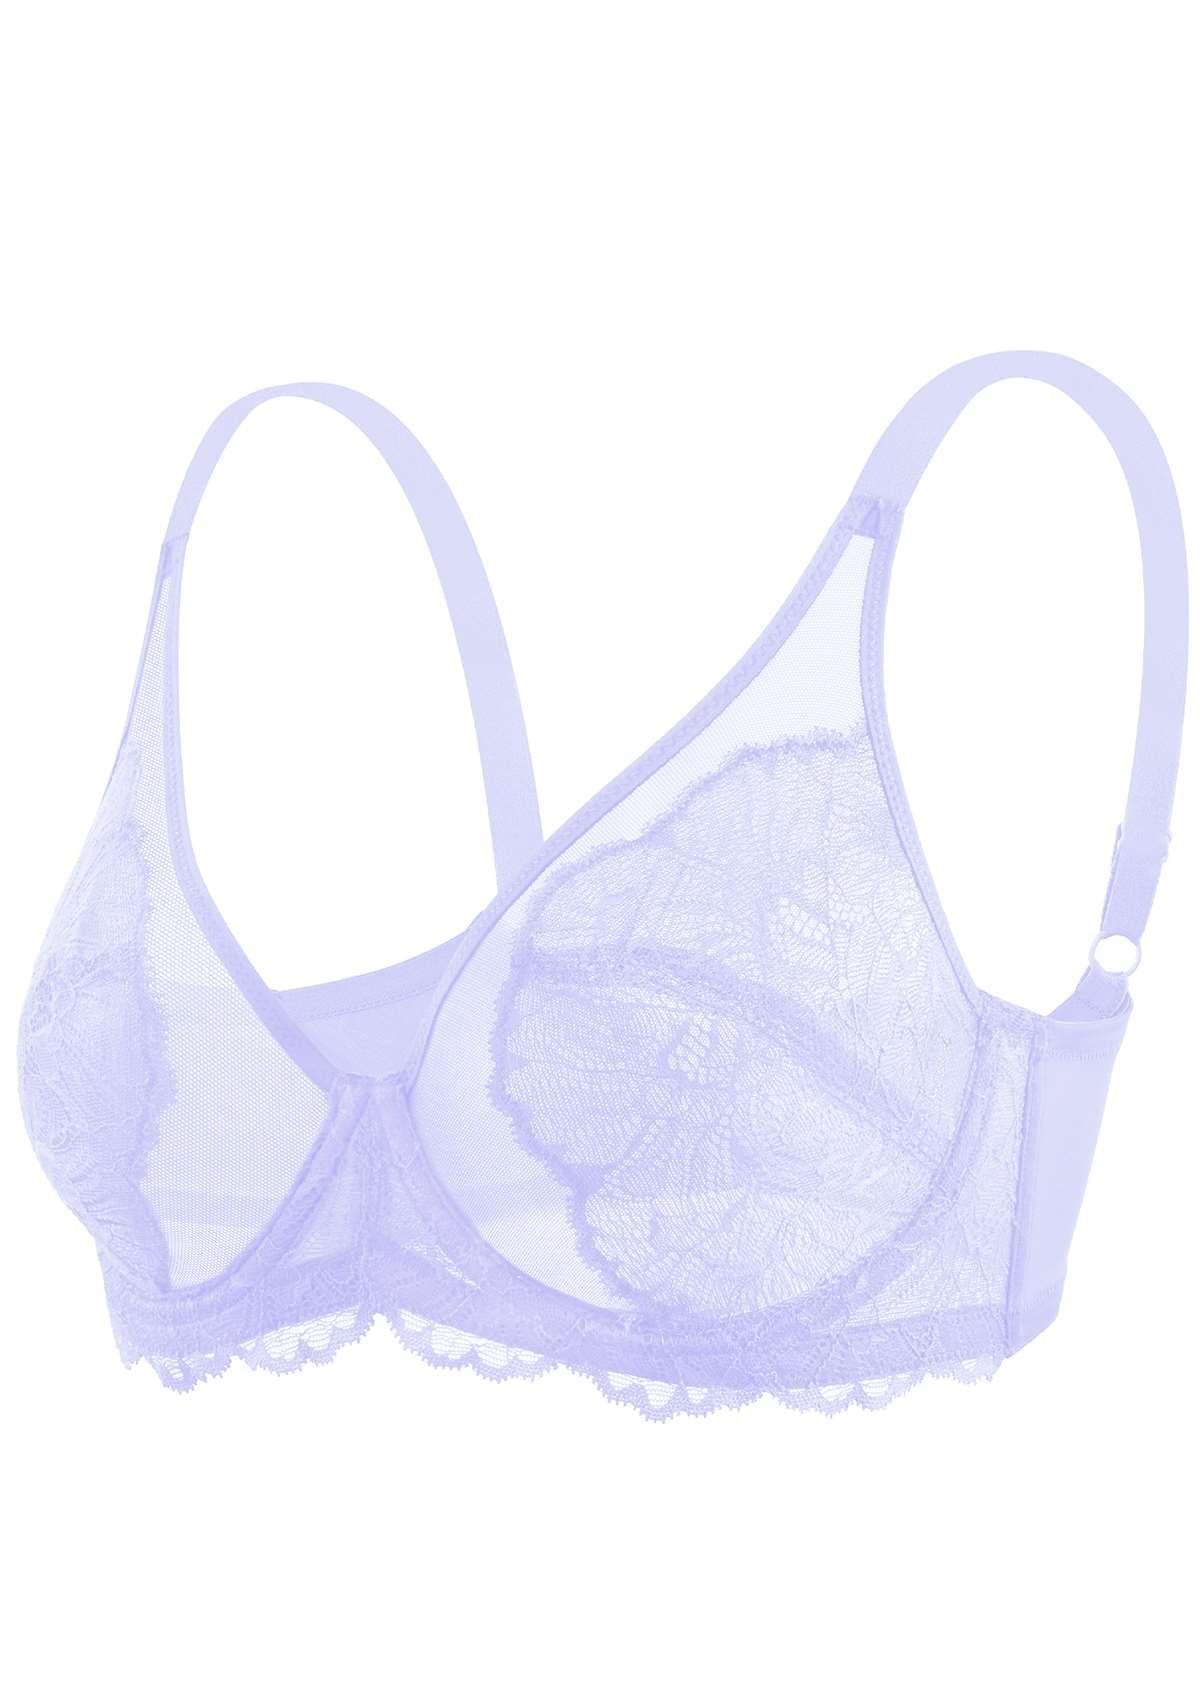 HSIA Blossom Transparent Lace Bra: Plus Size Wired Back Smoothing Bra - Purple / 36 / DDD/F